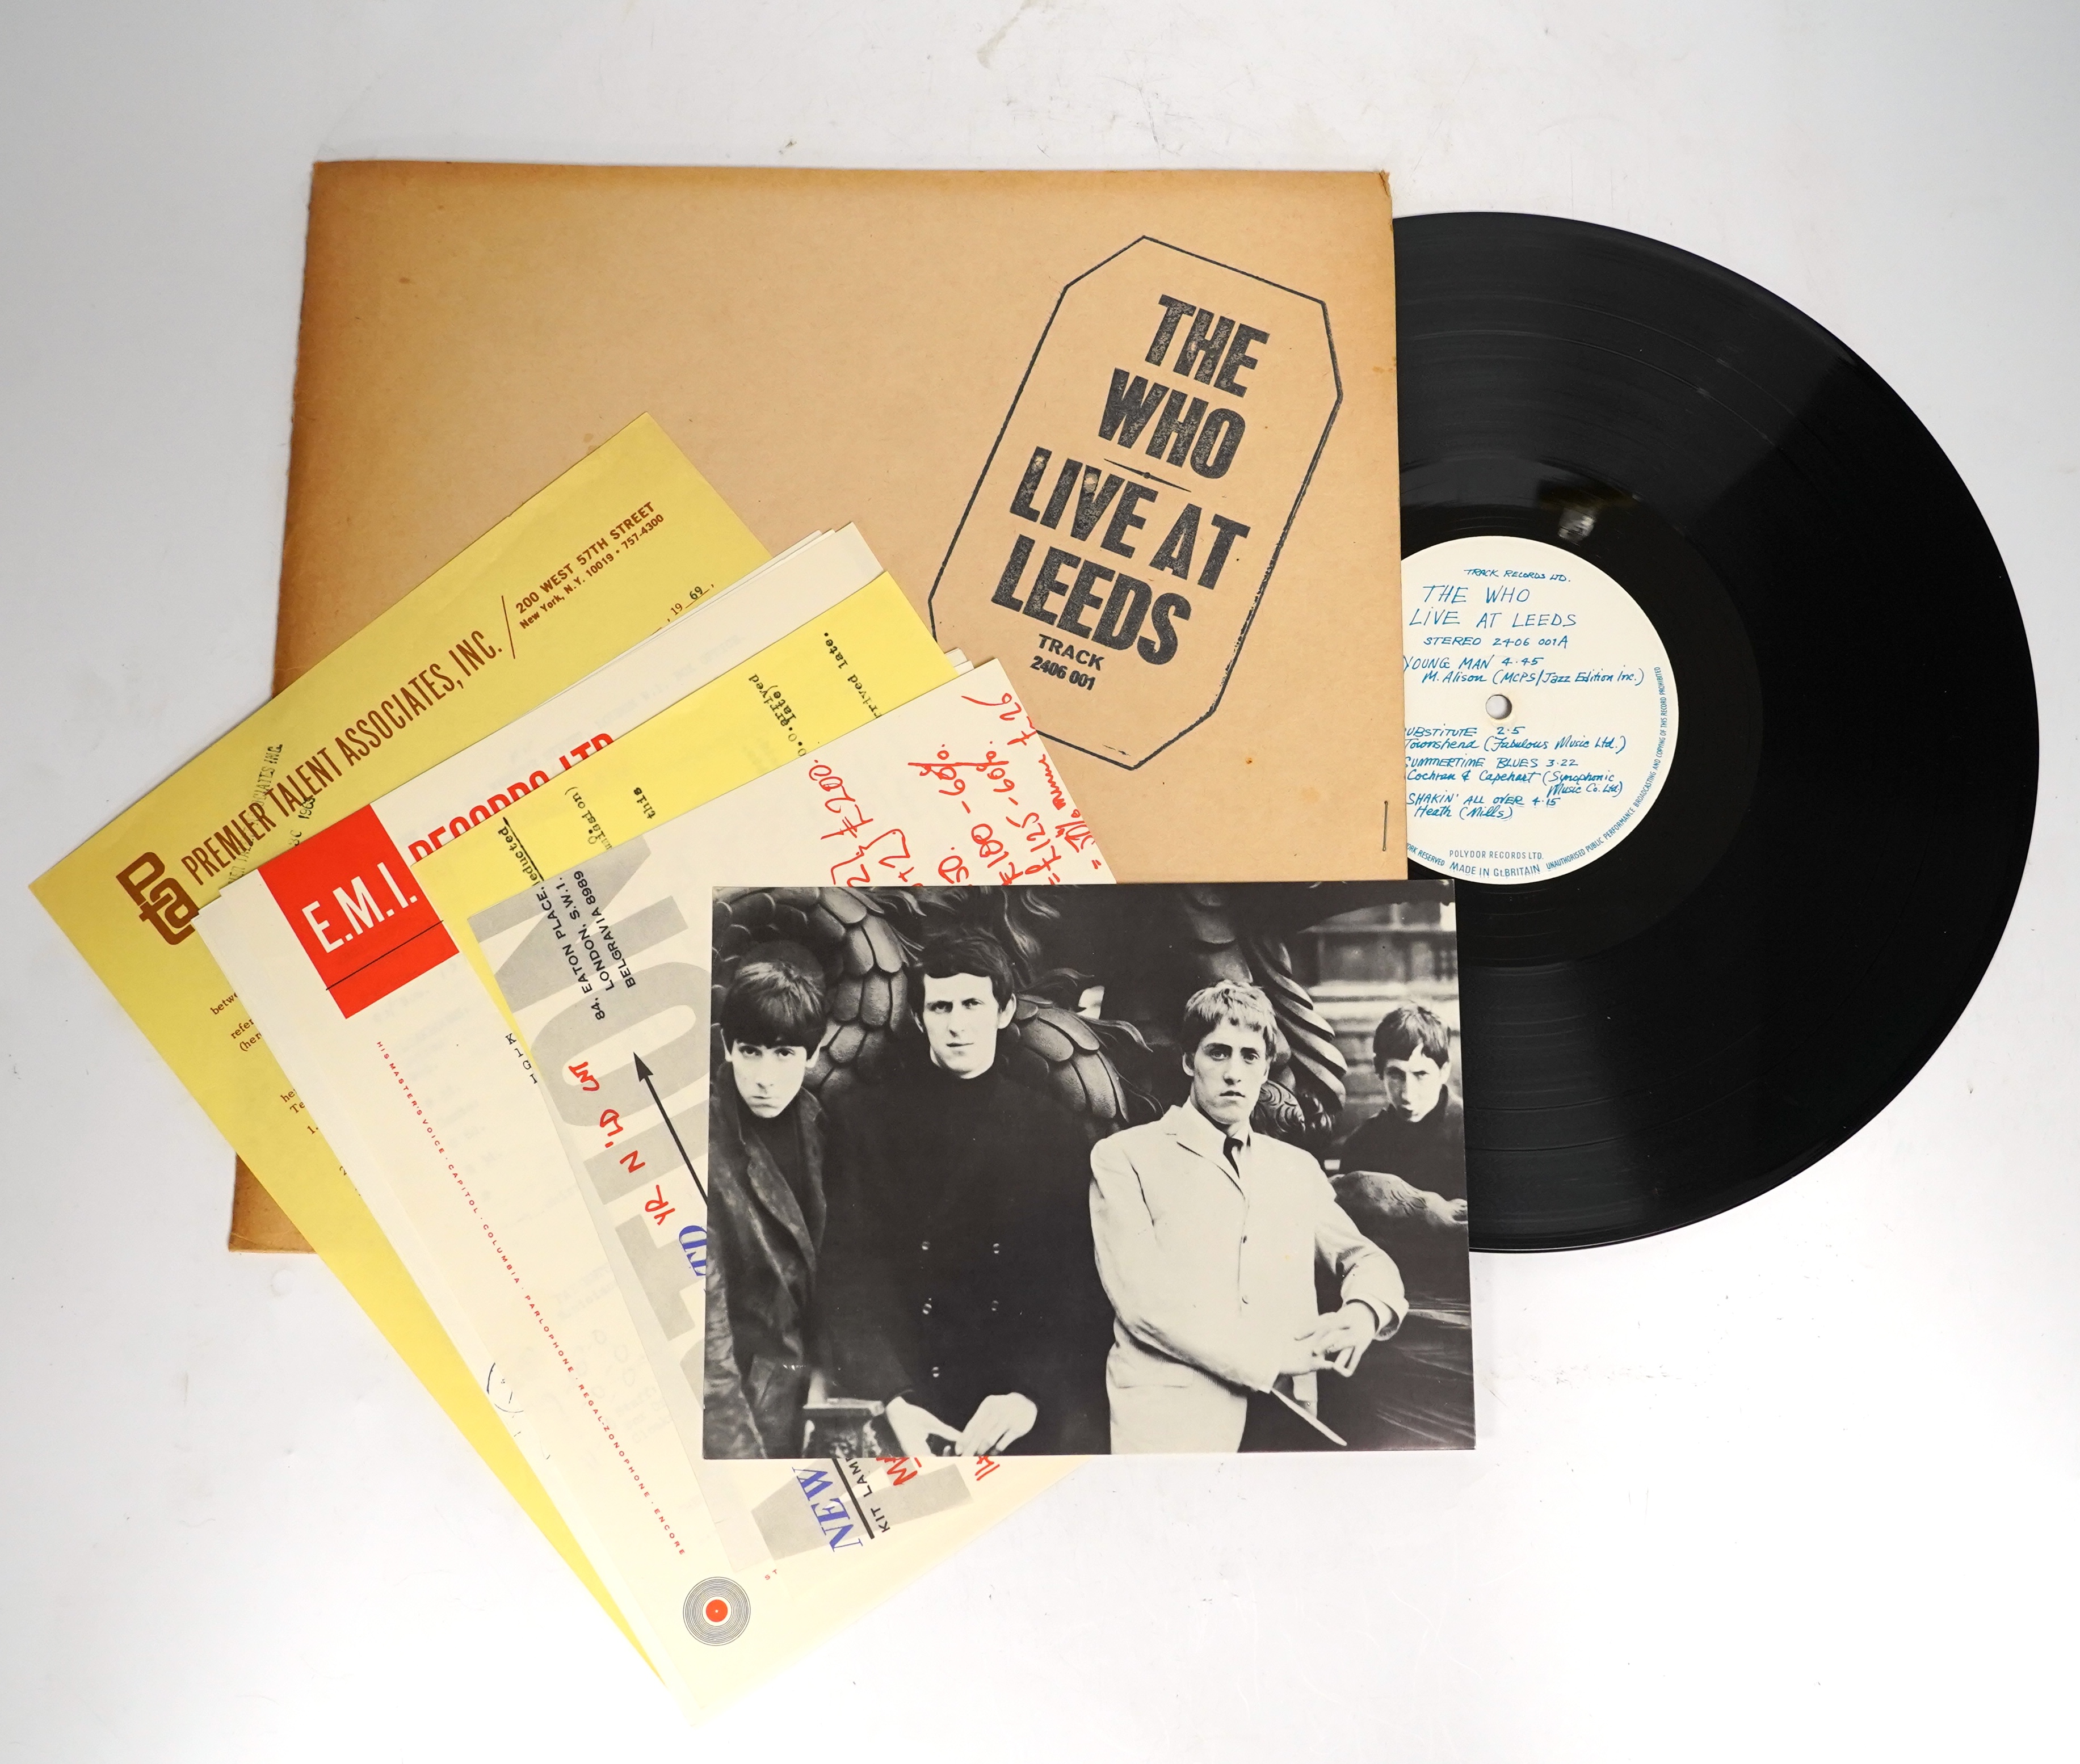 The Who; Live at Leeds LP record album on Track label 2406 001A, with black print to cover, eleven inserts present (poster missing)